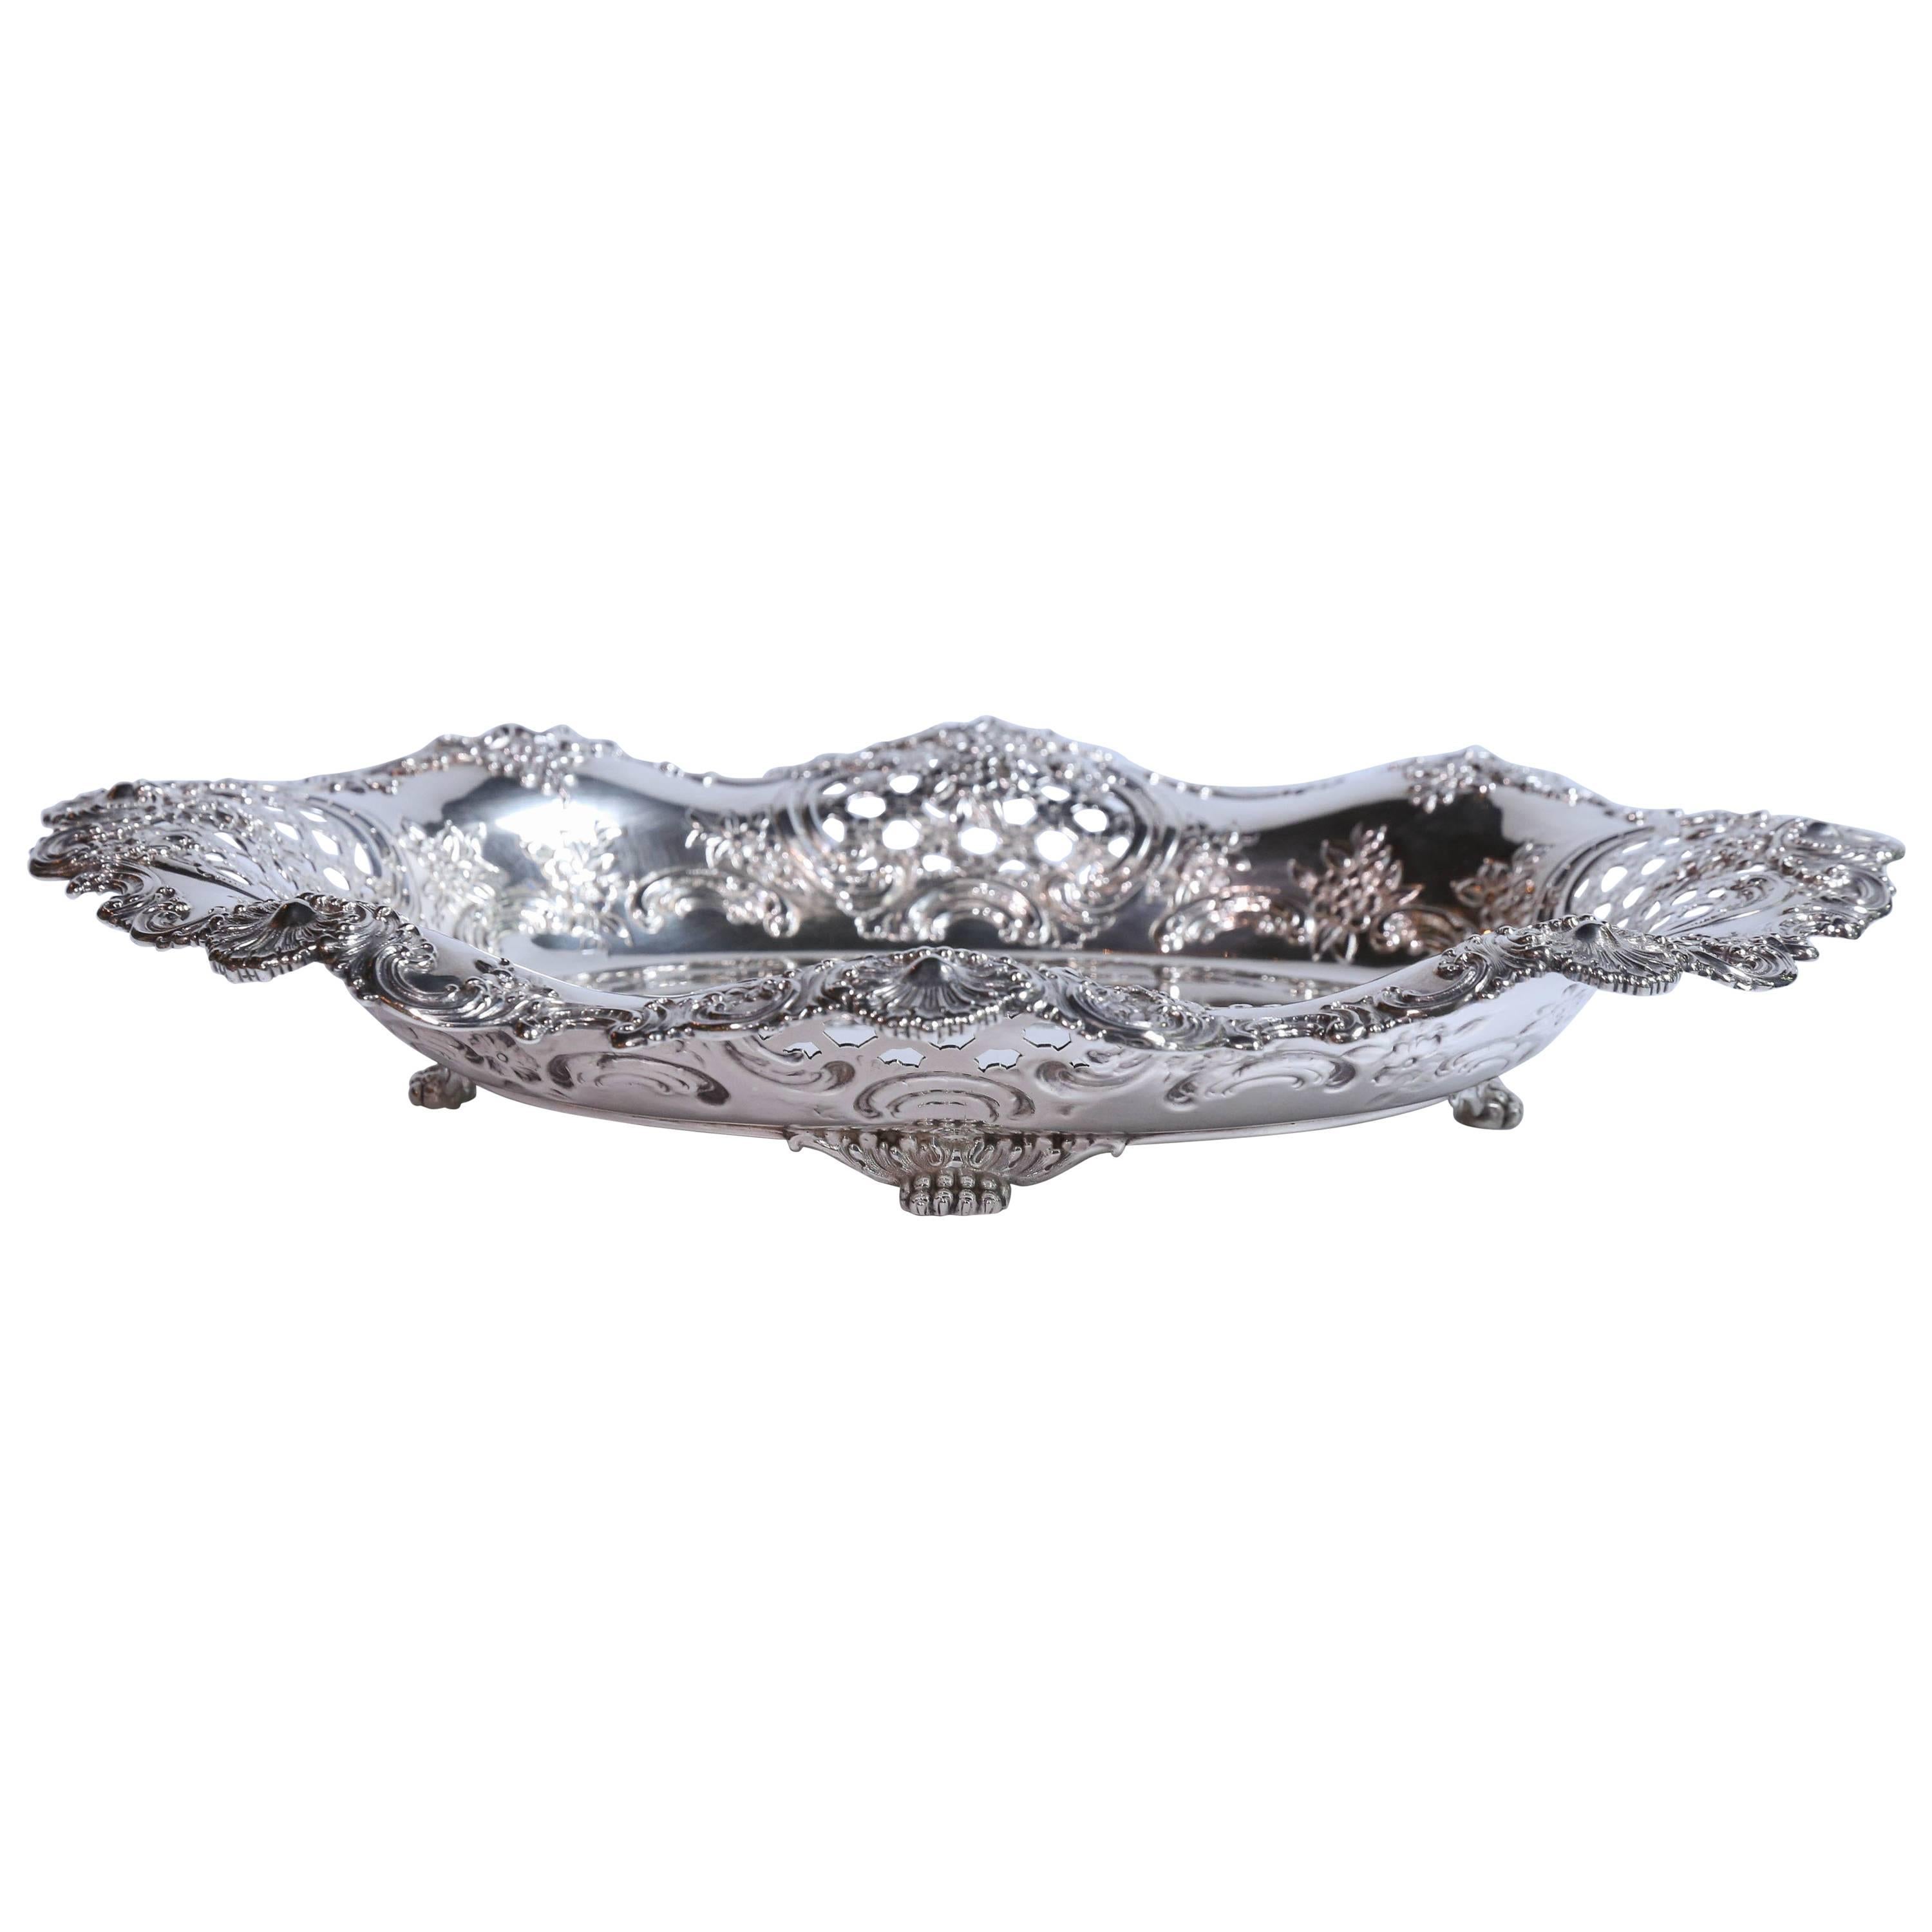 Very fine sterling tray with oval shape having tapering and lobed sides.
Reticulated open work on all four sides. Floral and foliage designs embellish
This lovely bowl. It rests on beaded feet.